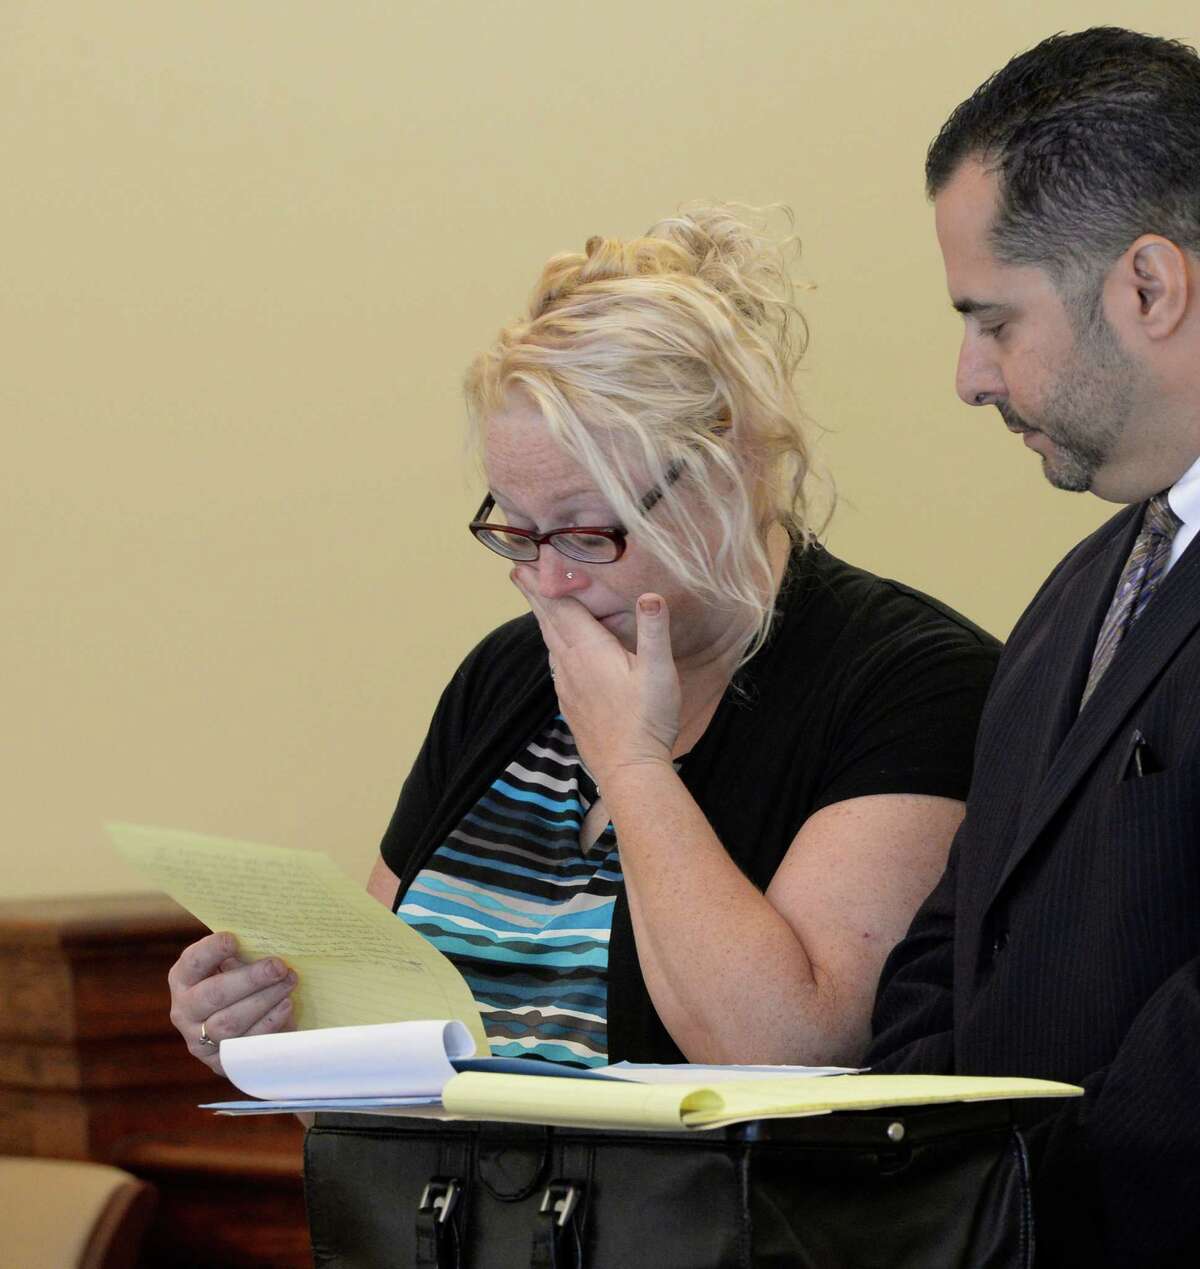 Becky Goodermote, 38, of Hoosick, is overcome by emotion as she took a plea bargain Thursday afternoon, Sept 16, 2013, in Rensselaer County Court in Troy, N.Y. Goodermote was charged with manslaughter, driving while impaired by drugs and leaving the scene of a Labor Day 2012 crash that killed a bicyclist. Standing with her is her attorney Michael Jurena. Goodermote's car, hit Matthew Ratelle, 40, of Petersburgh. (Skip Dickstein / Times Union)